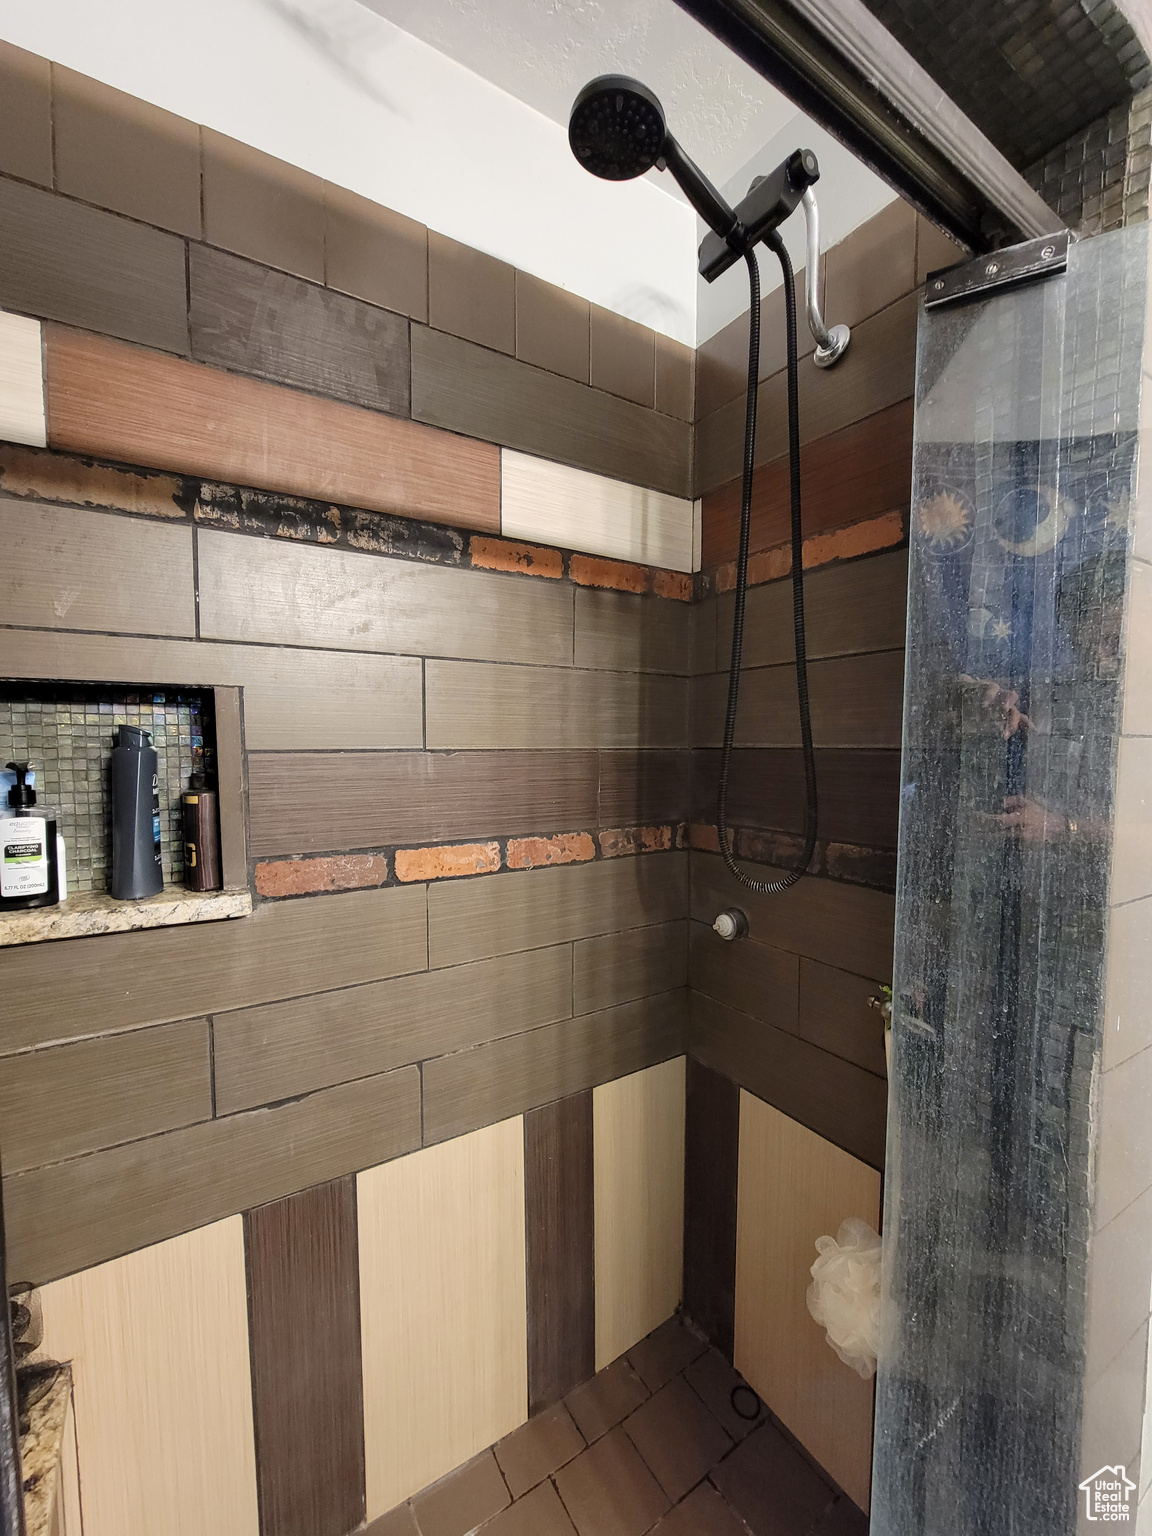 Tile shower with shower bench